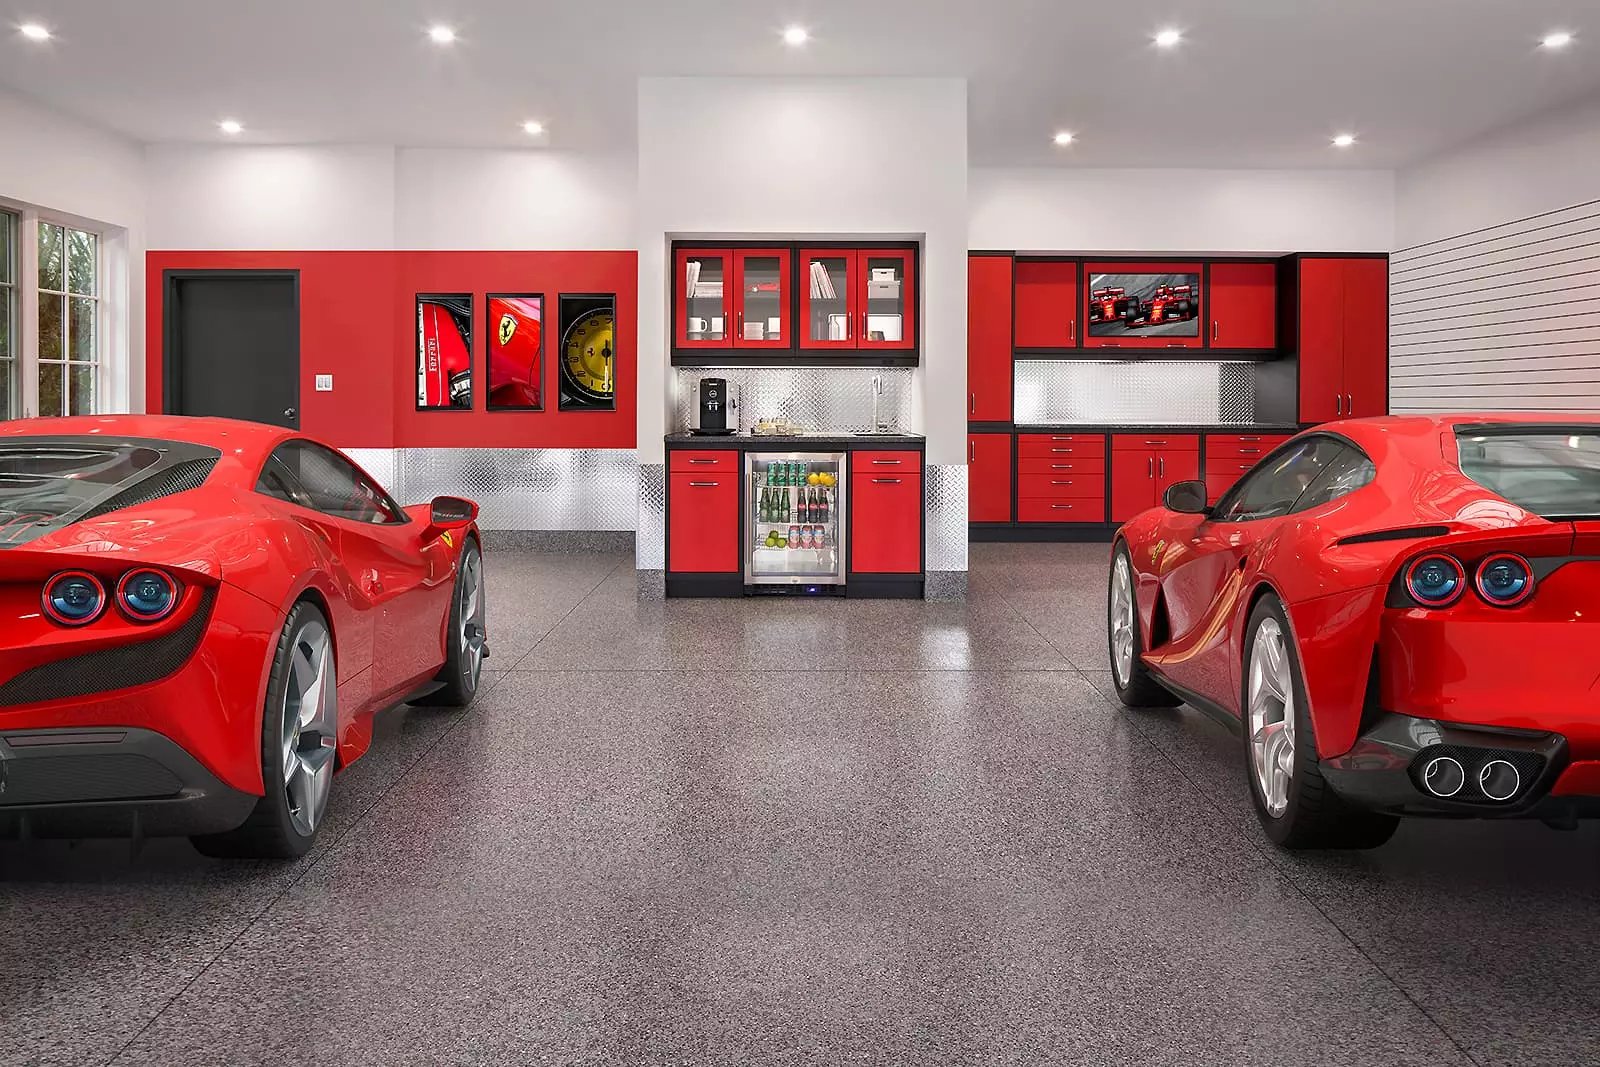 xperformance-red-garage-01.jpg.pagespeed.ic.YflH9SCuX8